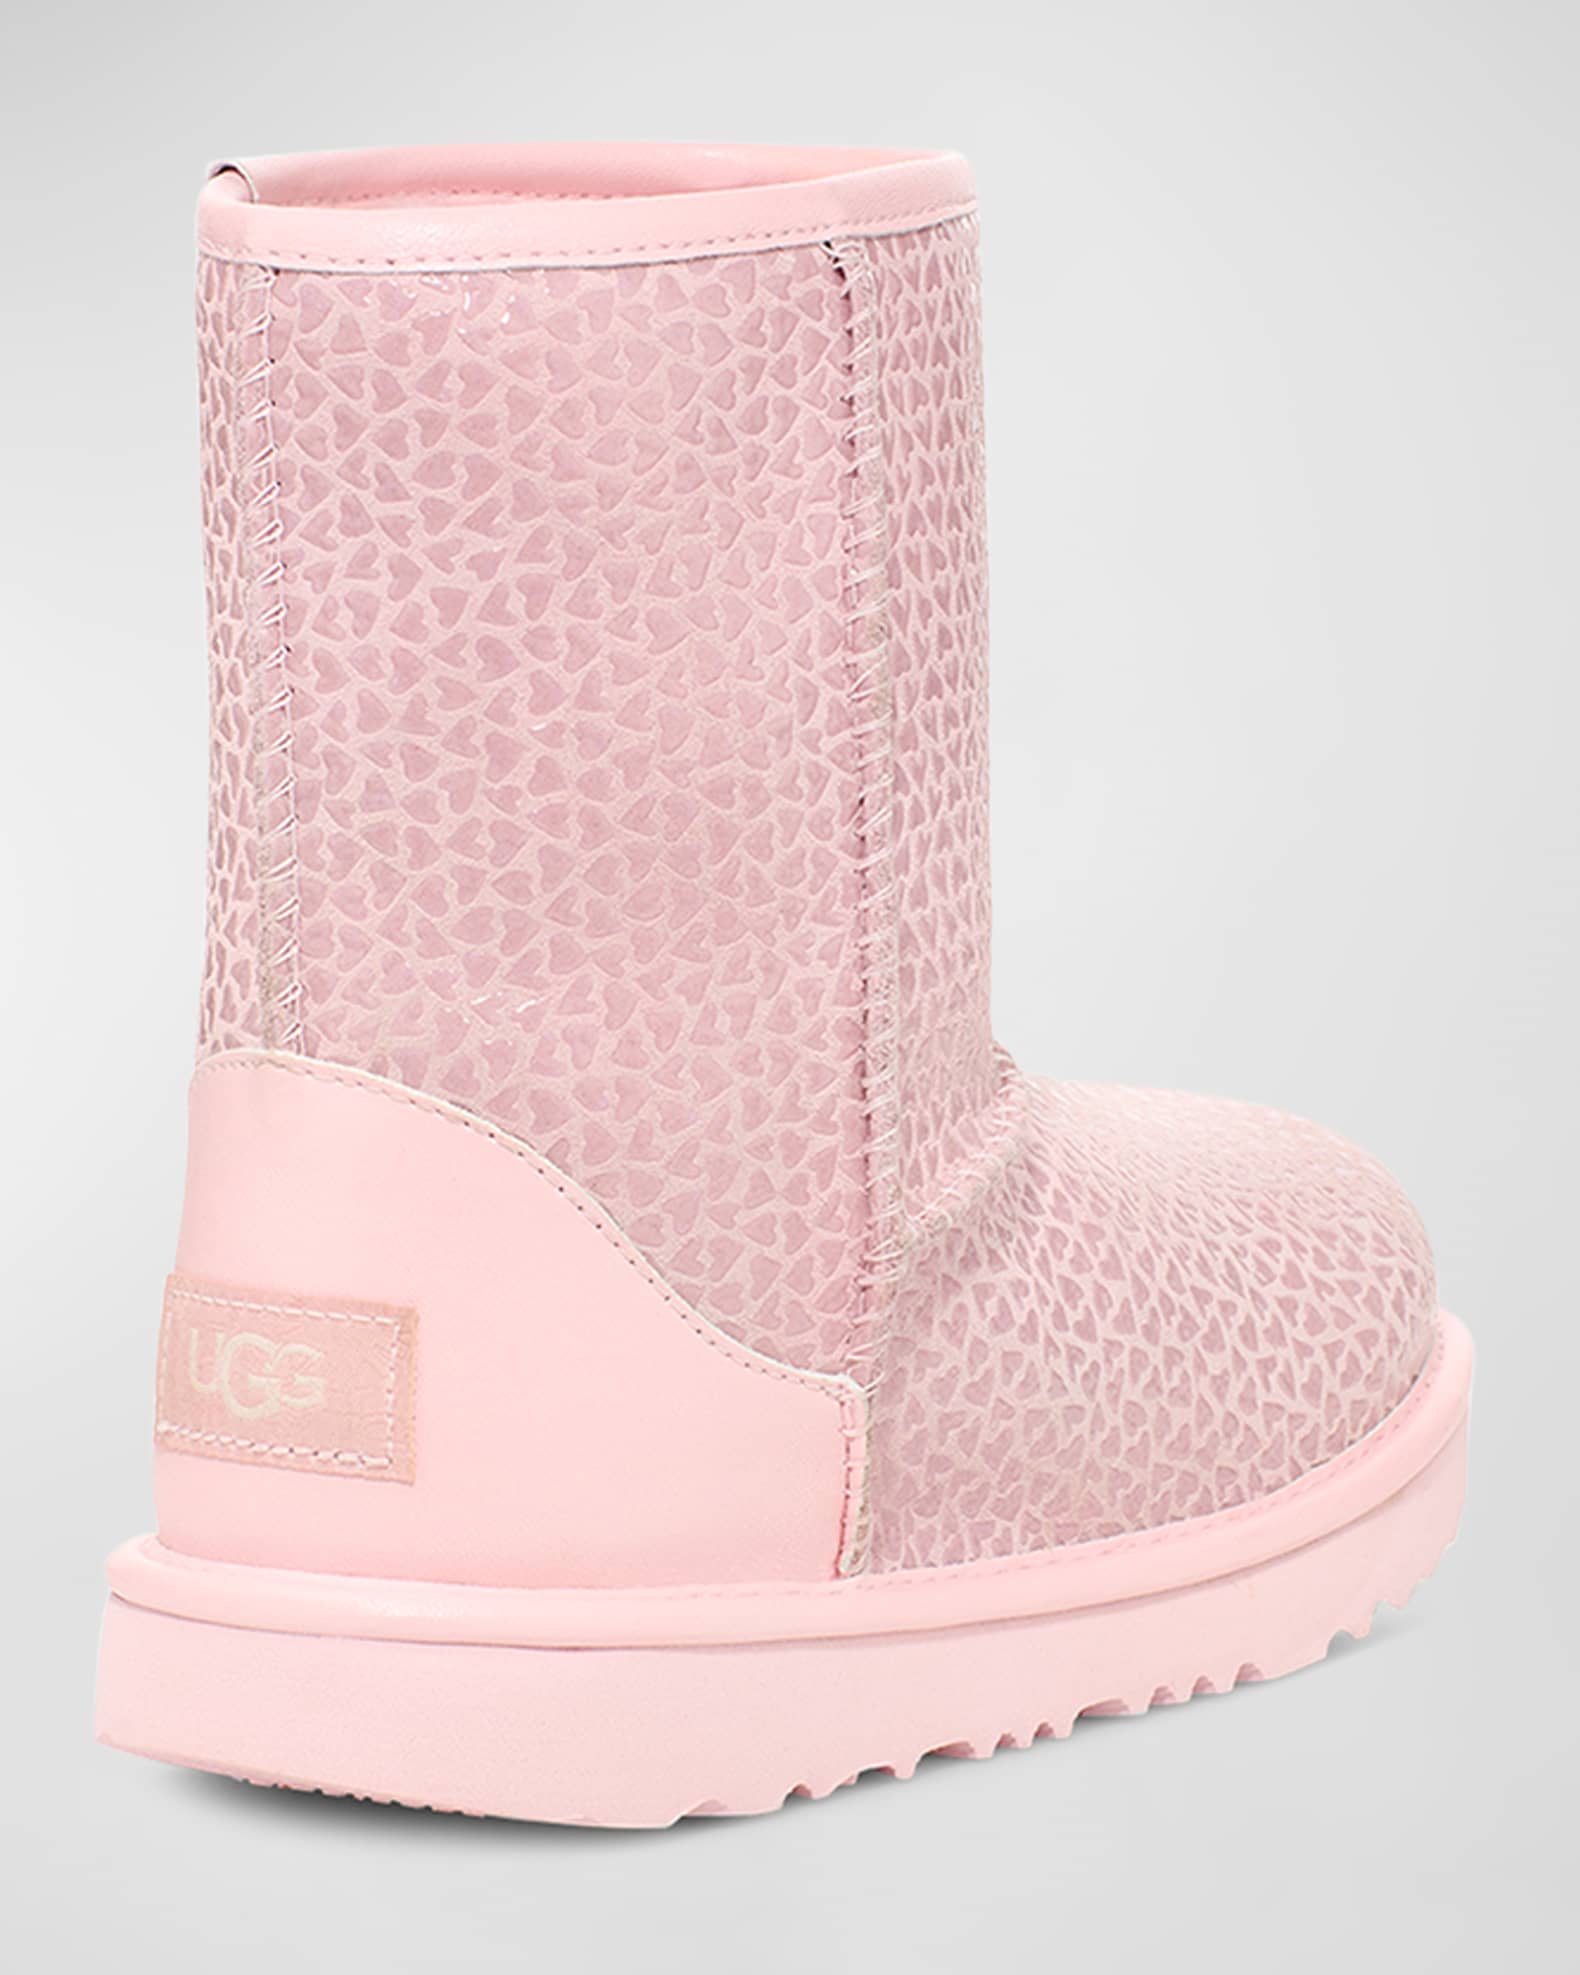 L UGG Boots  Ugg boots, Lv boots, Boots